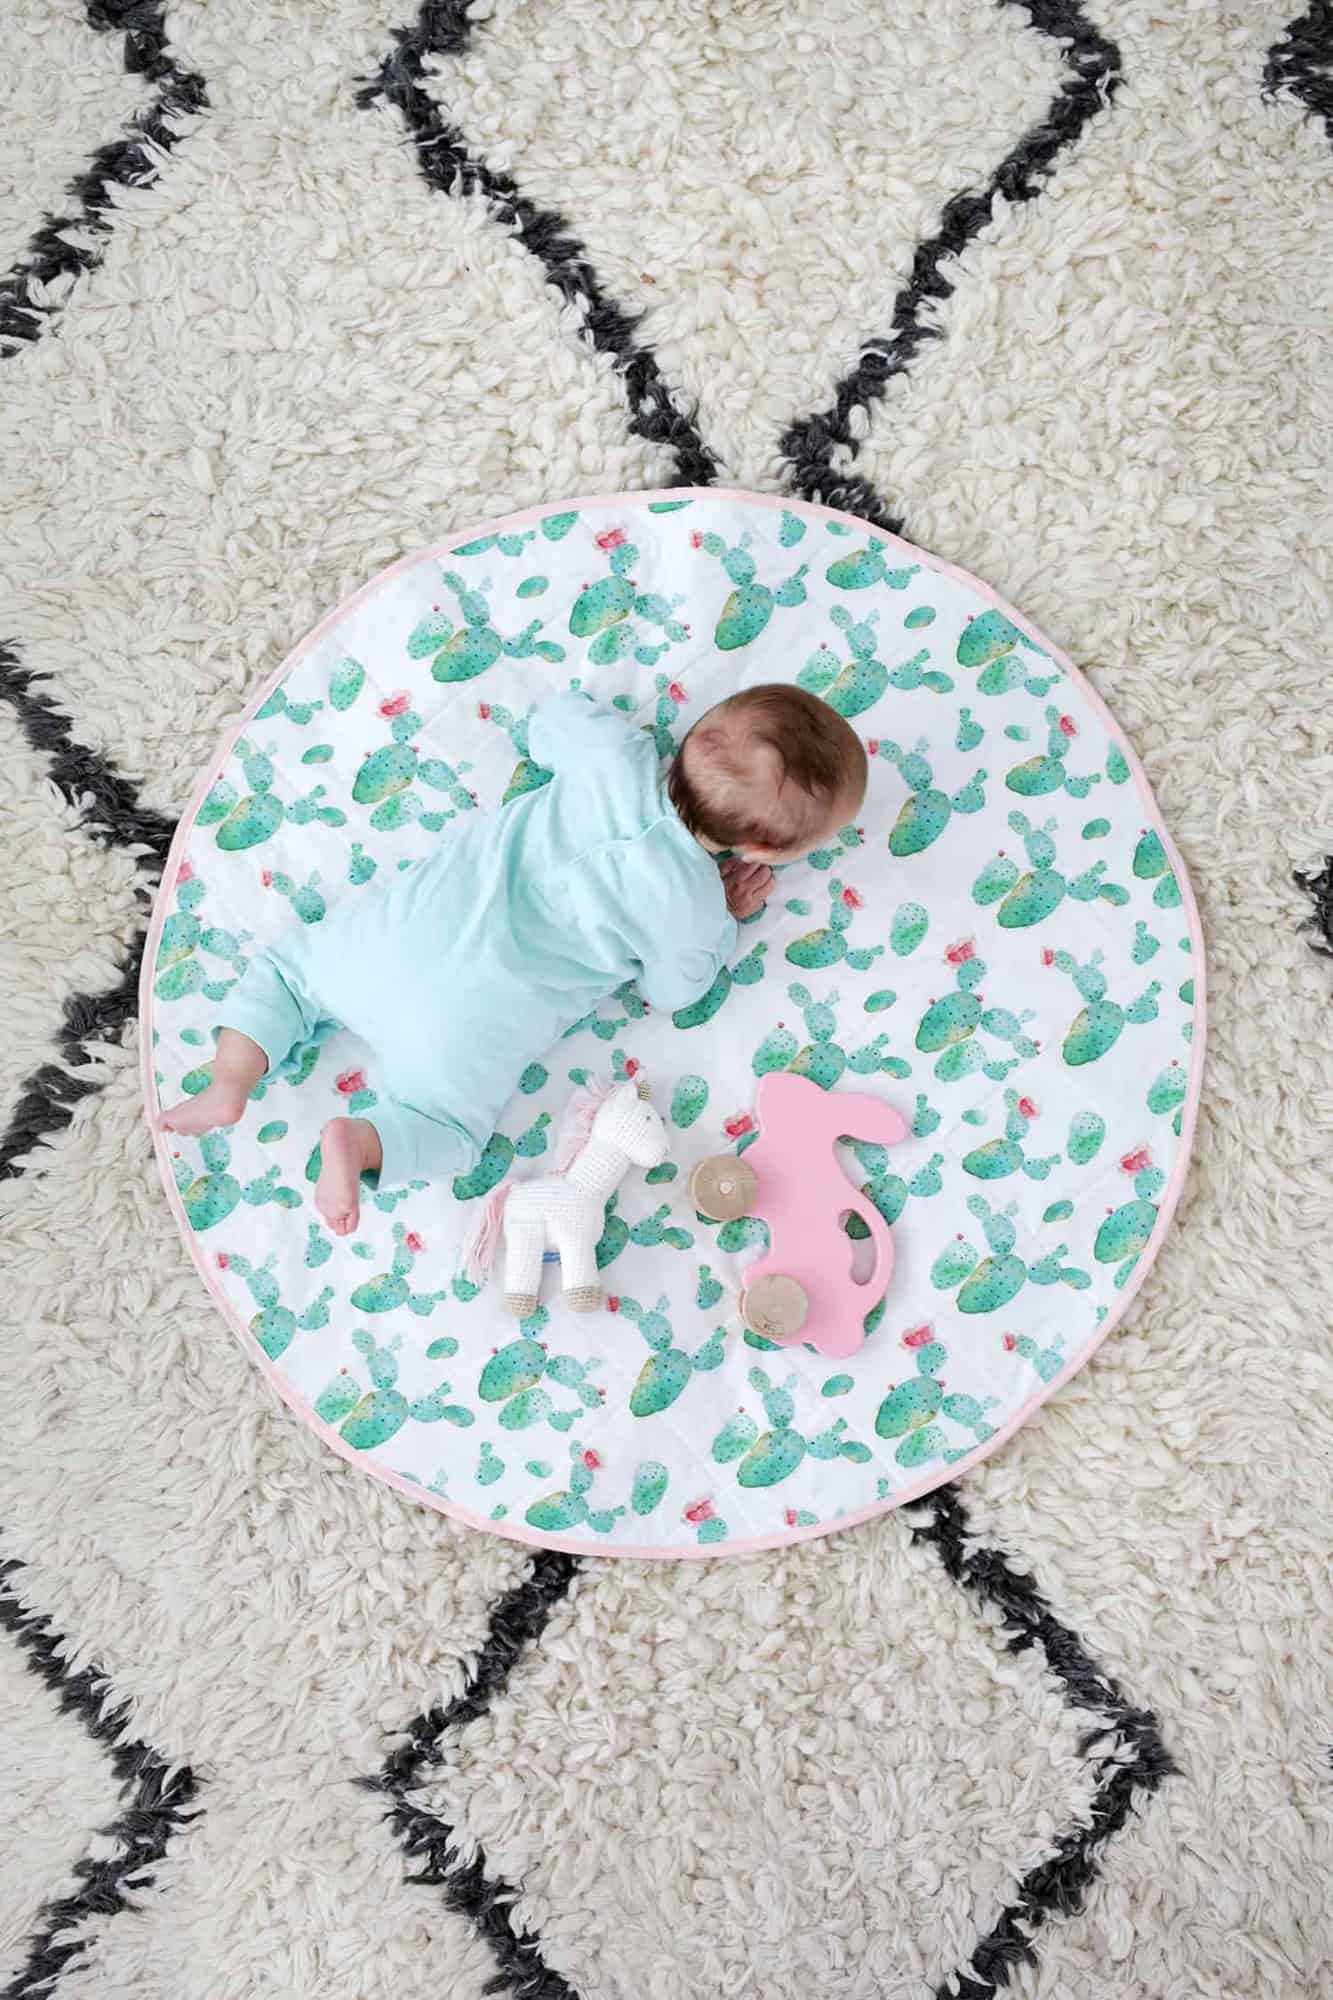 BLACK AND WHITE BABY PADDED ROUND TUMMY TIME PLAY MAT ROUNDIES NURSERY  BLANKET 